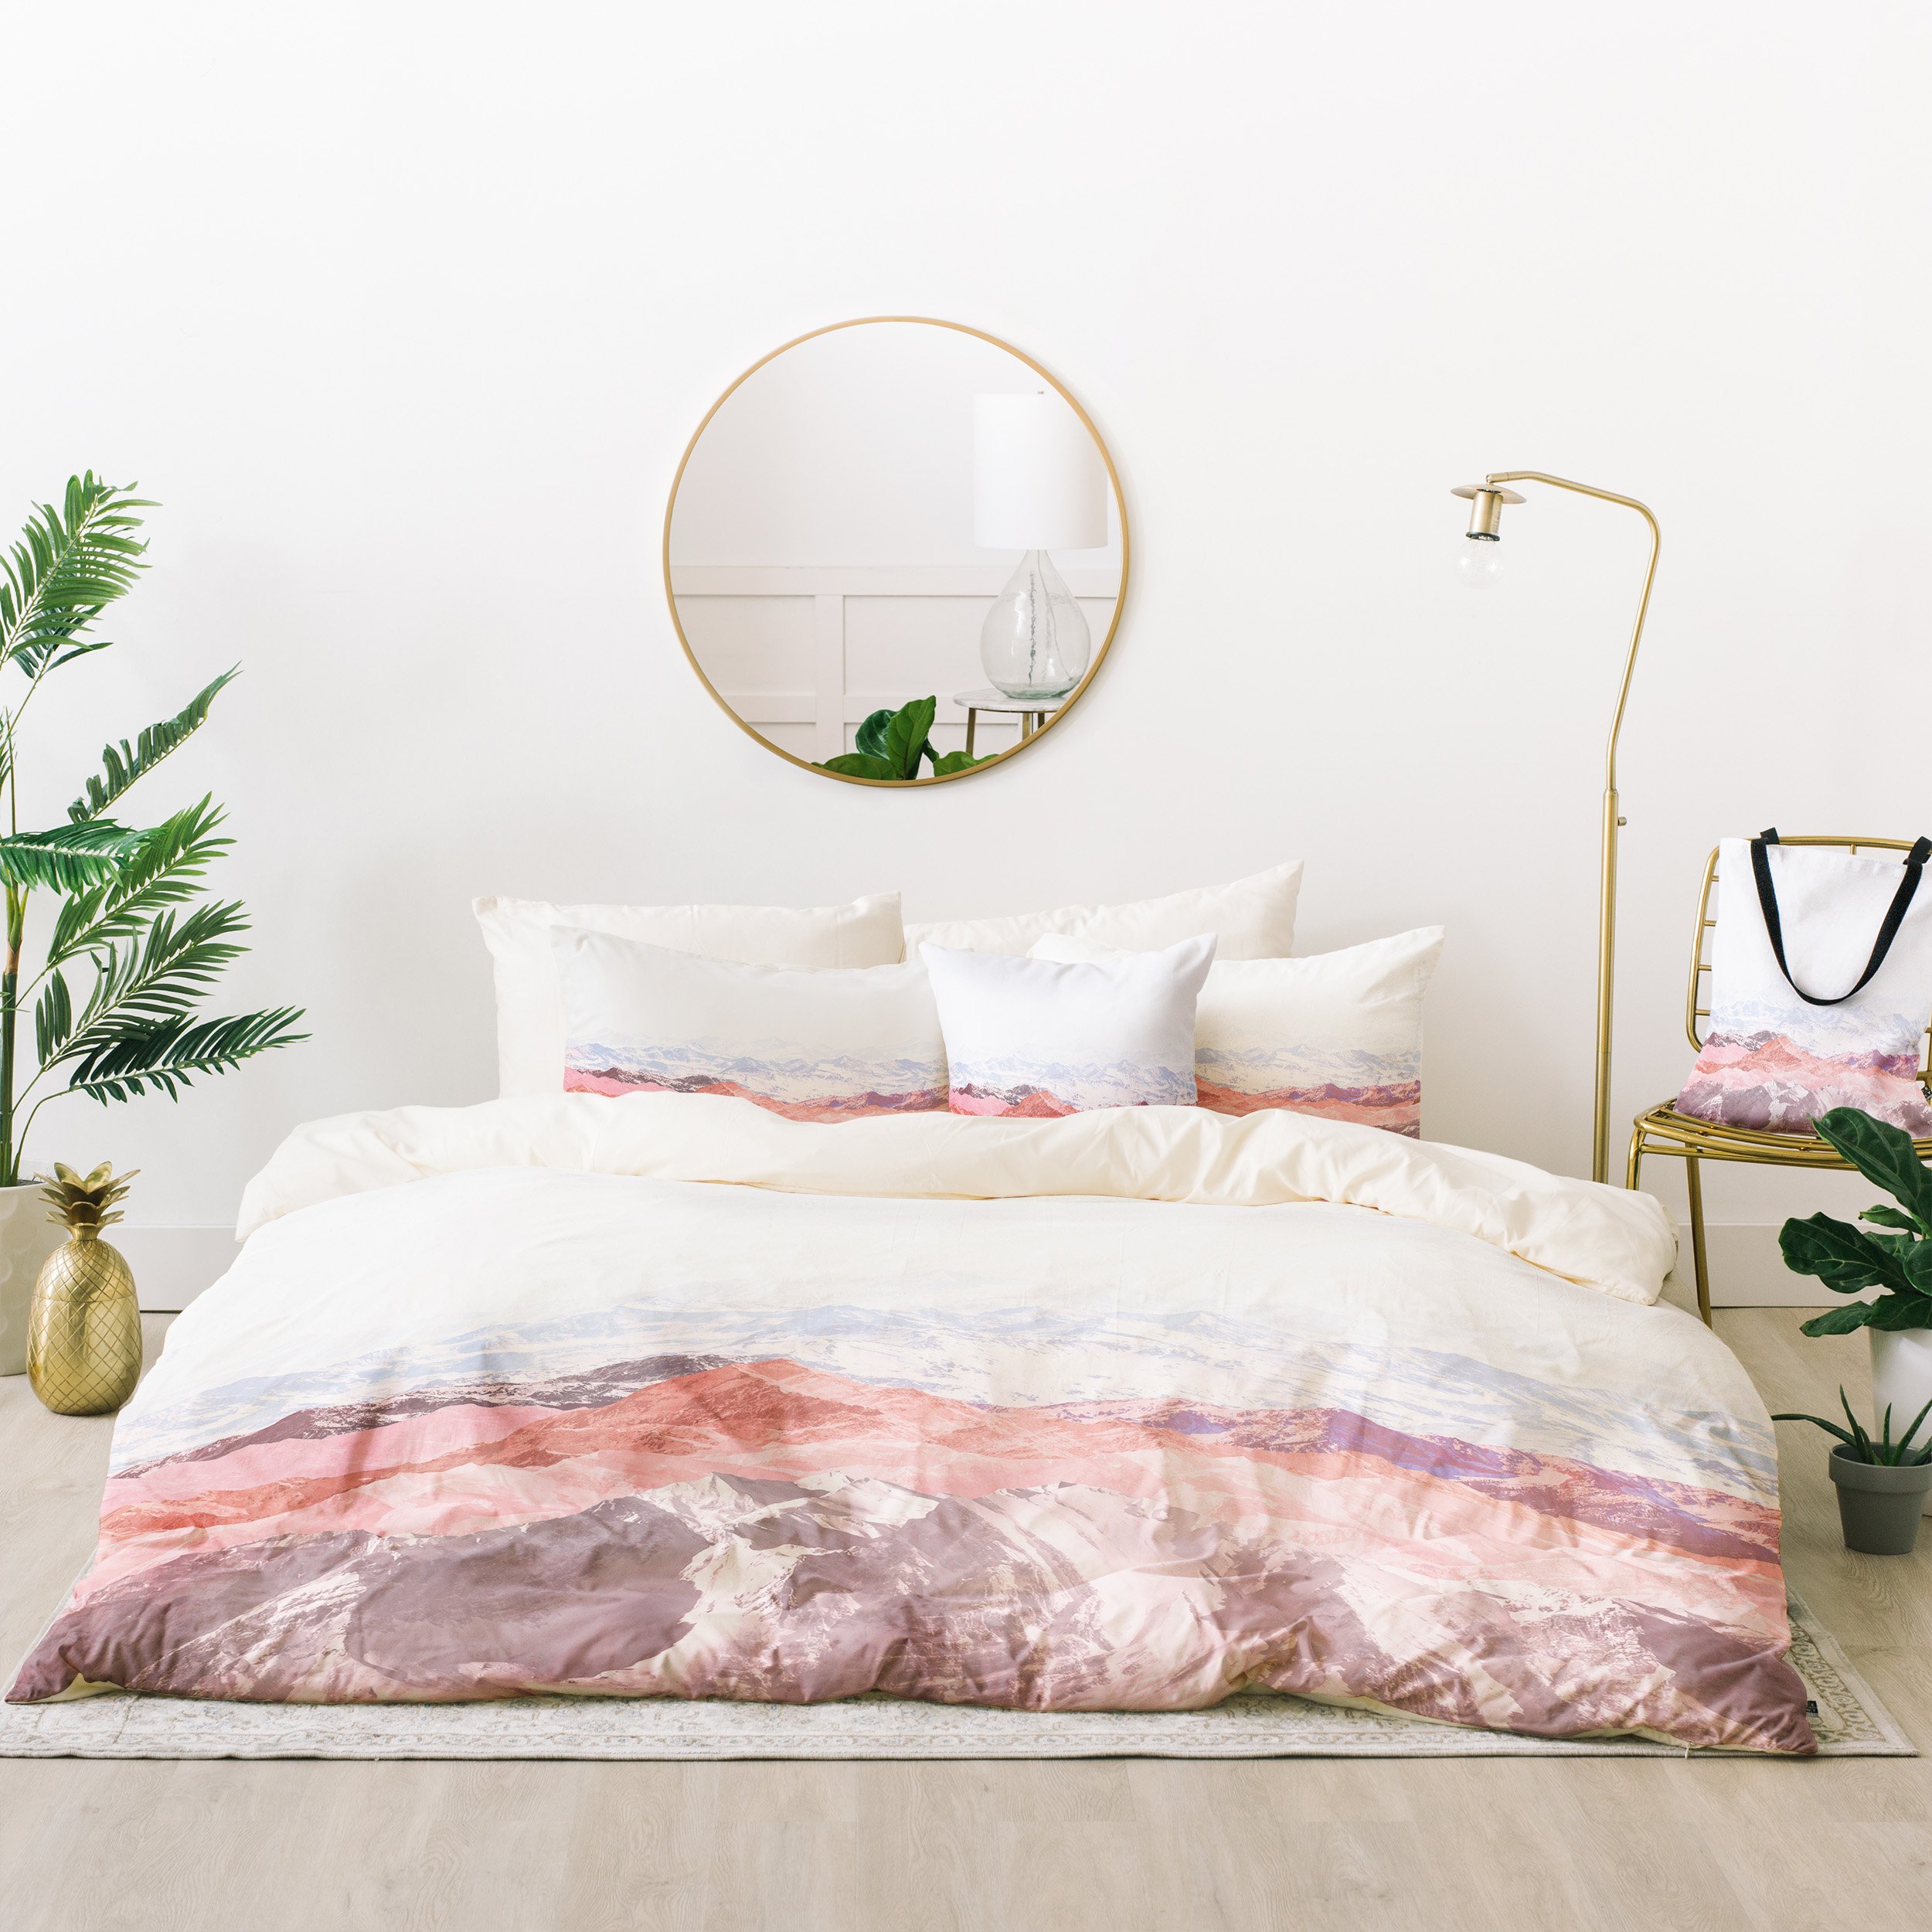 Pastel duvet cover on a bed